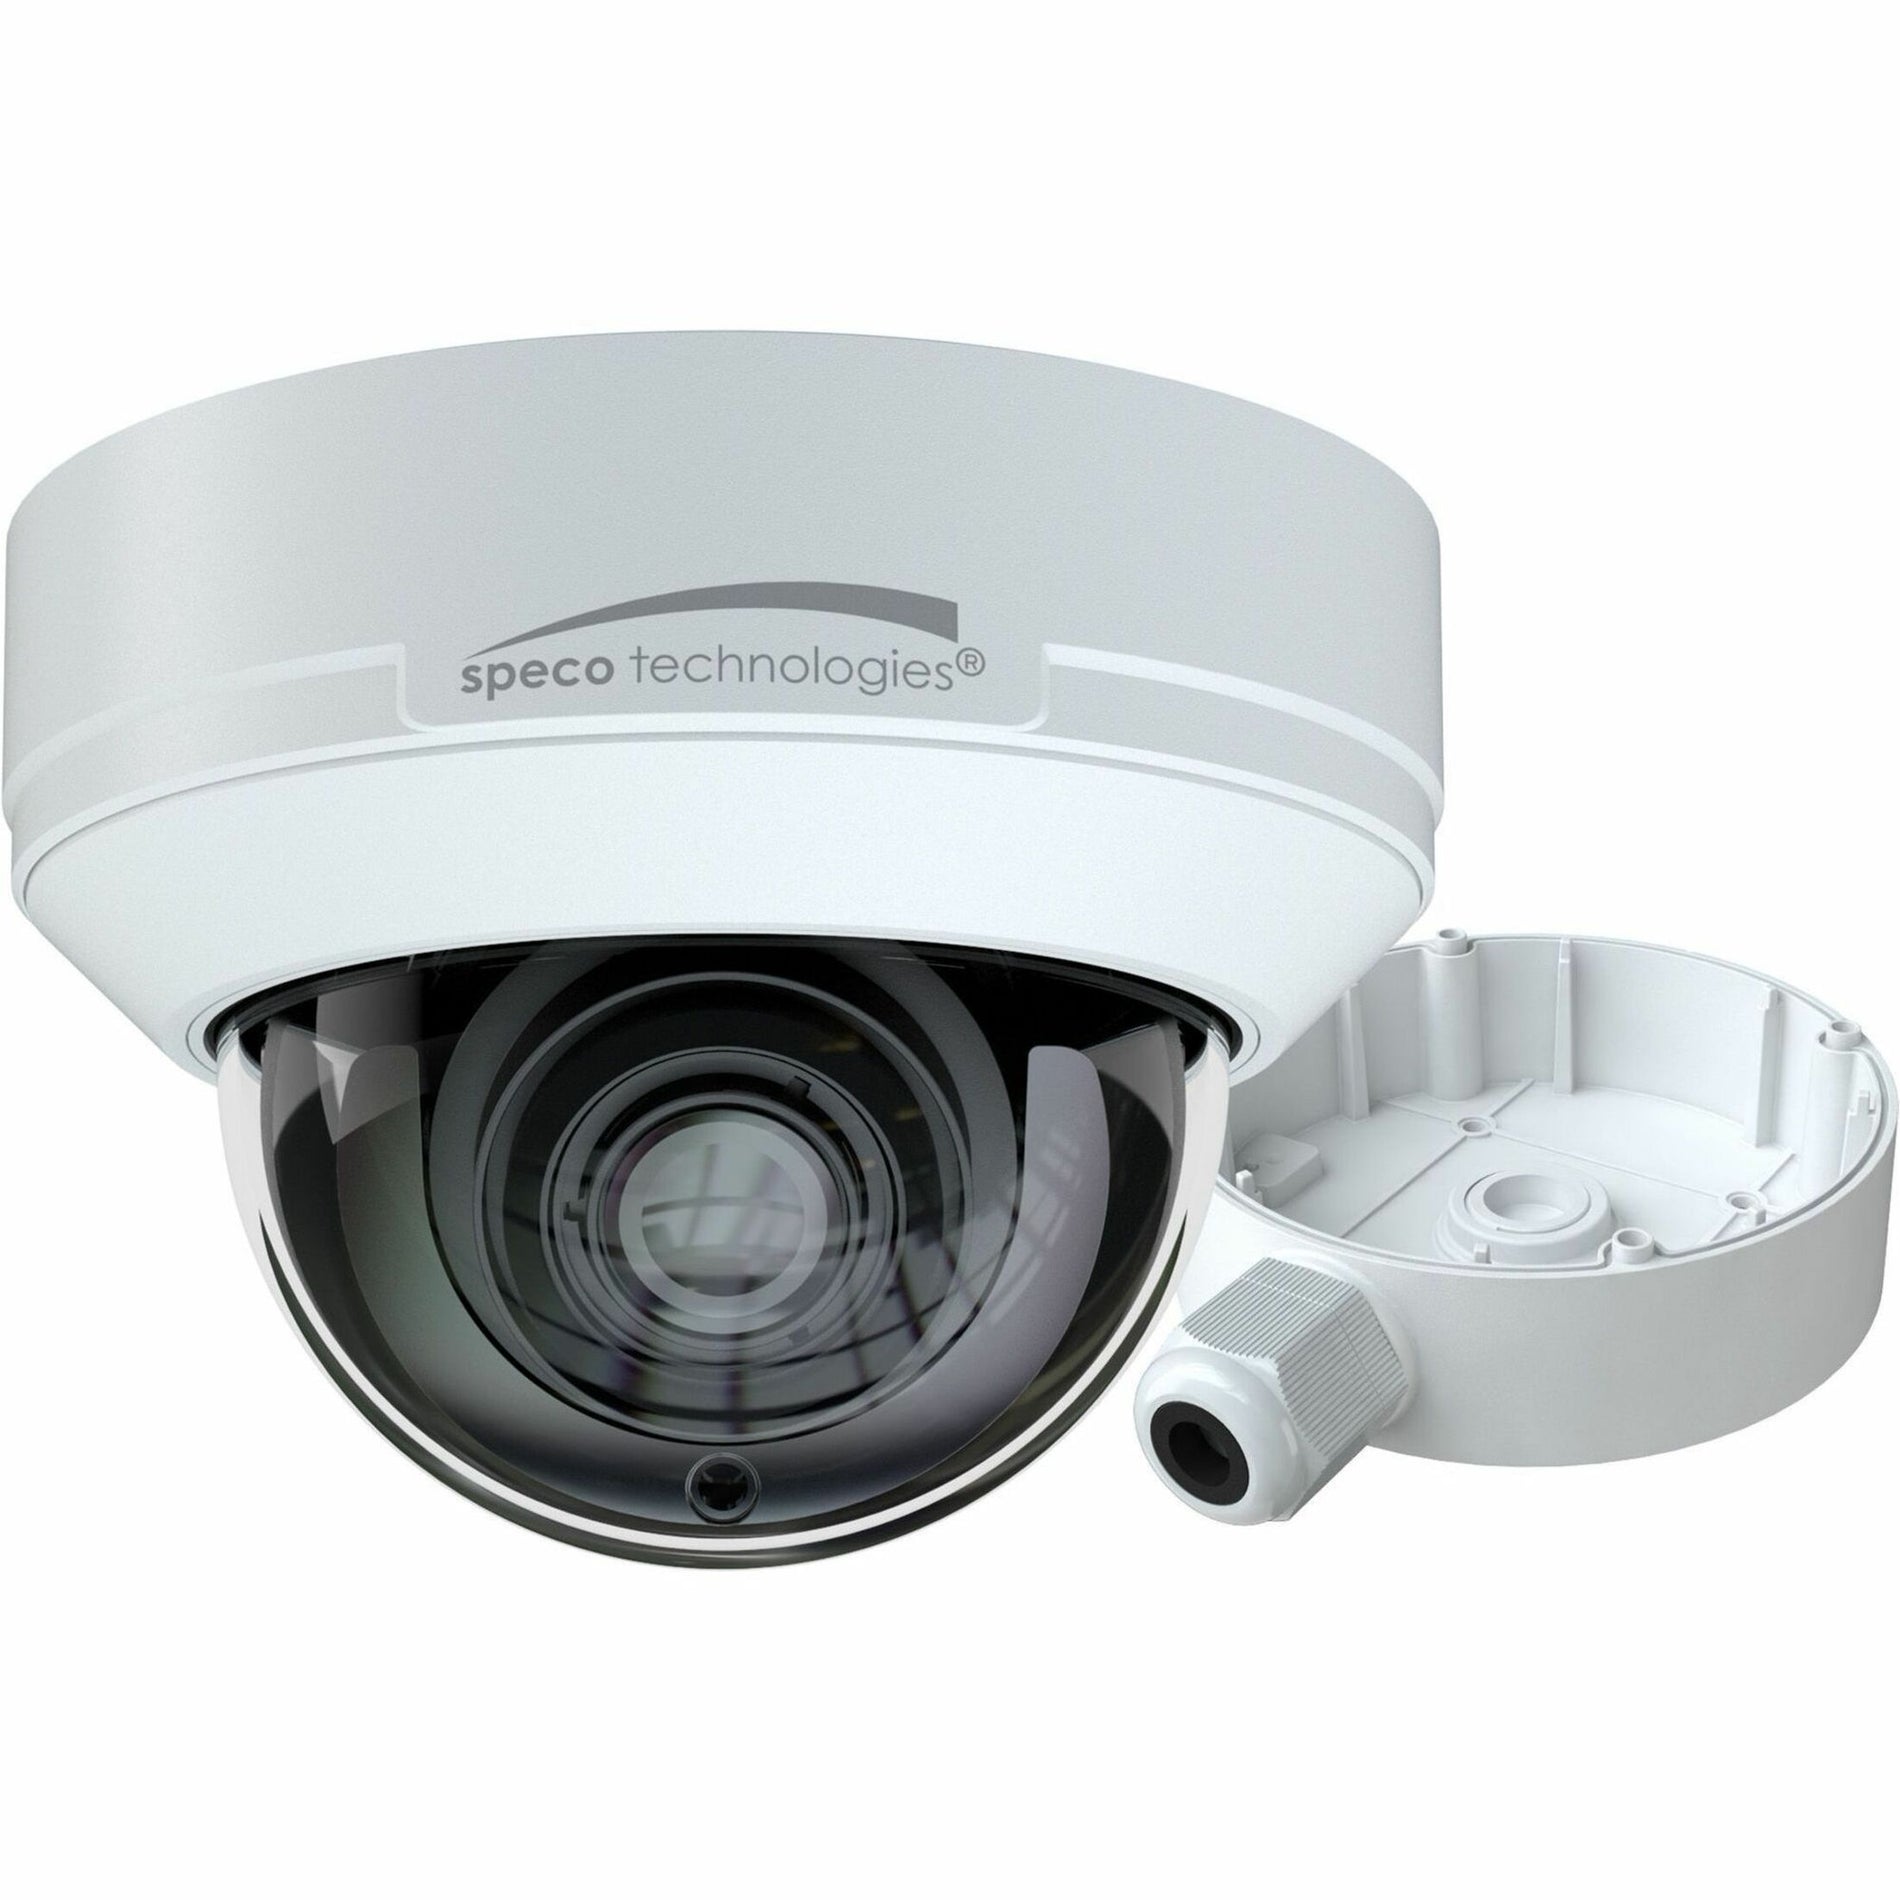 Speco O8D9M 8MP (4K) IP Dome Camera with Advanced Analytics, NDAA Compliant, Varifocal Lens, 4.2x Optical Zoom, Motion Detection, Wide Dynamic Range, SD Card Local Storage